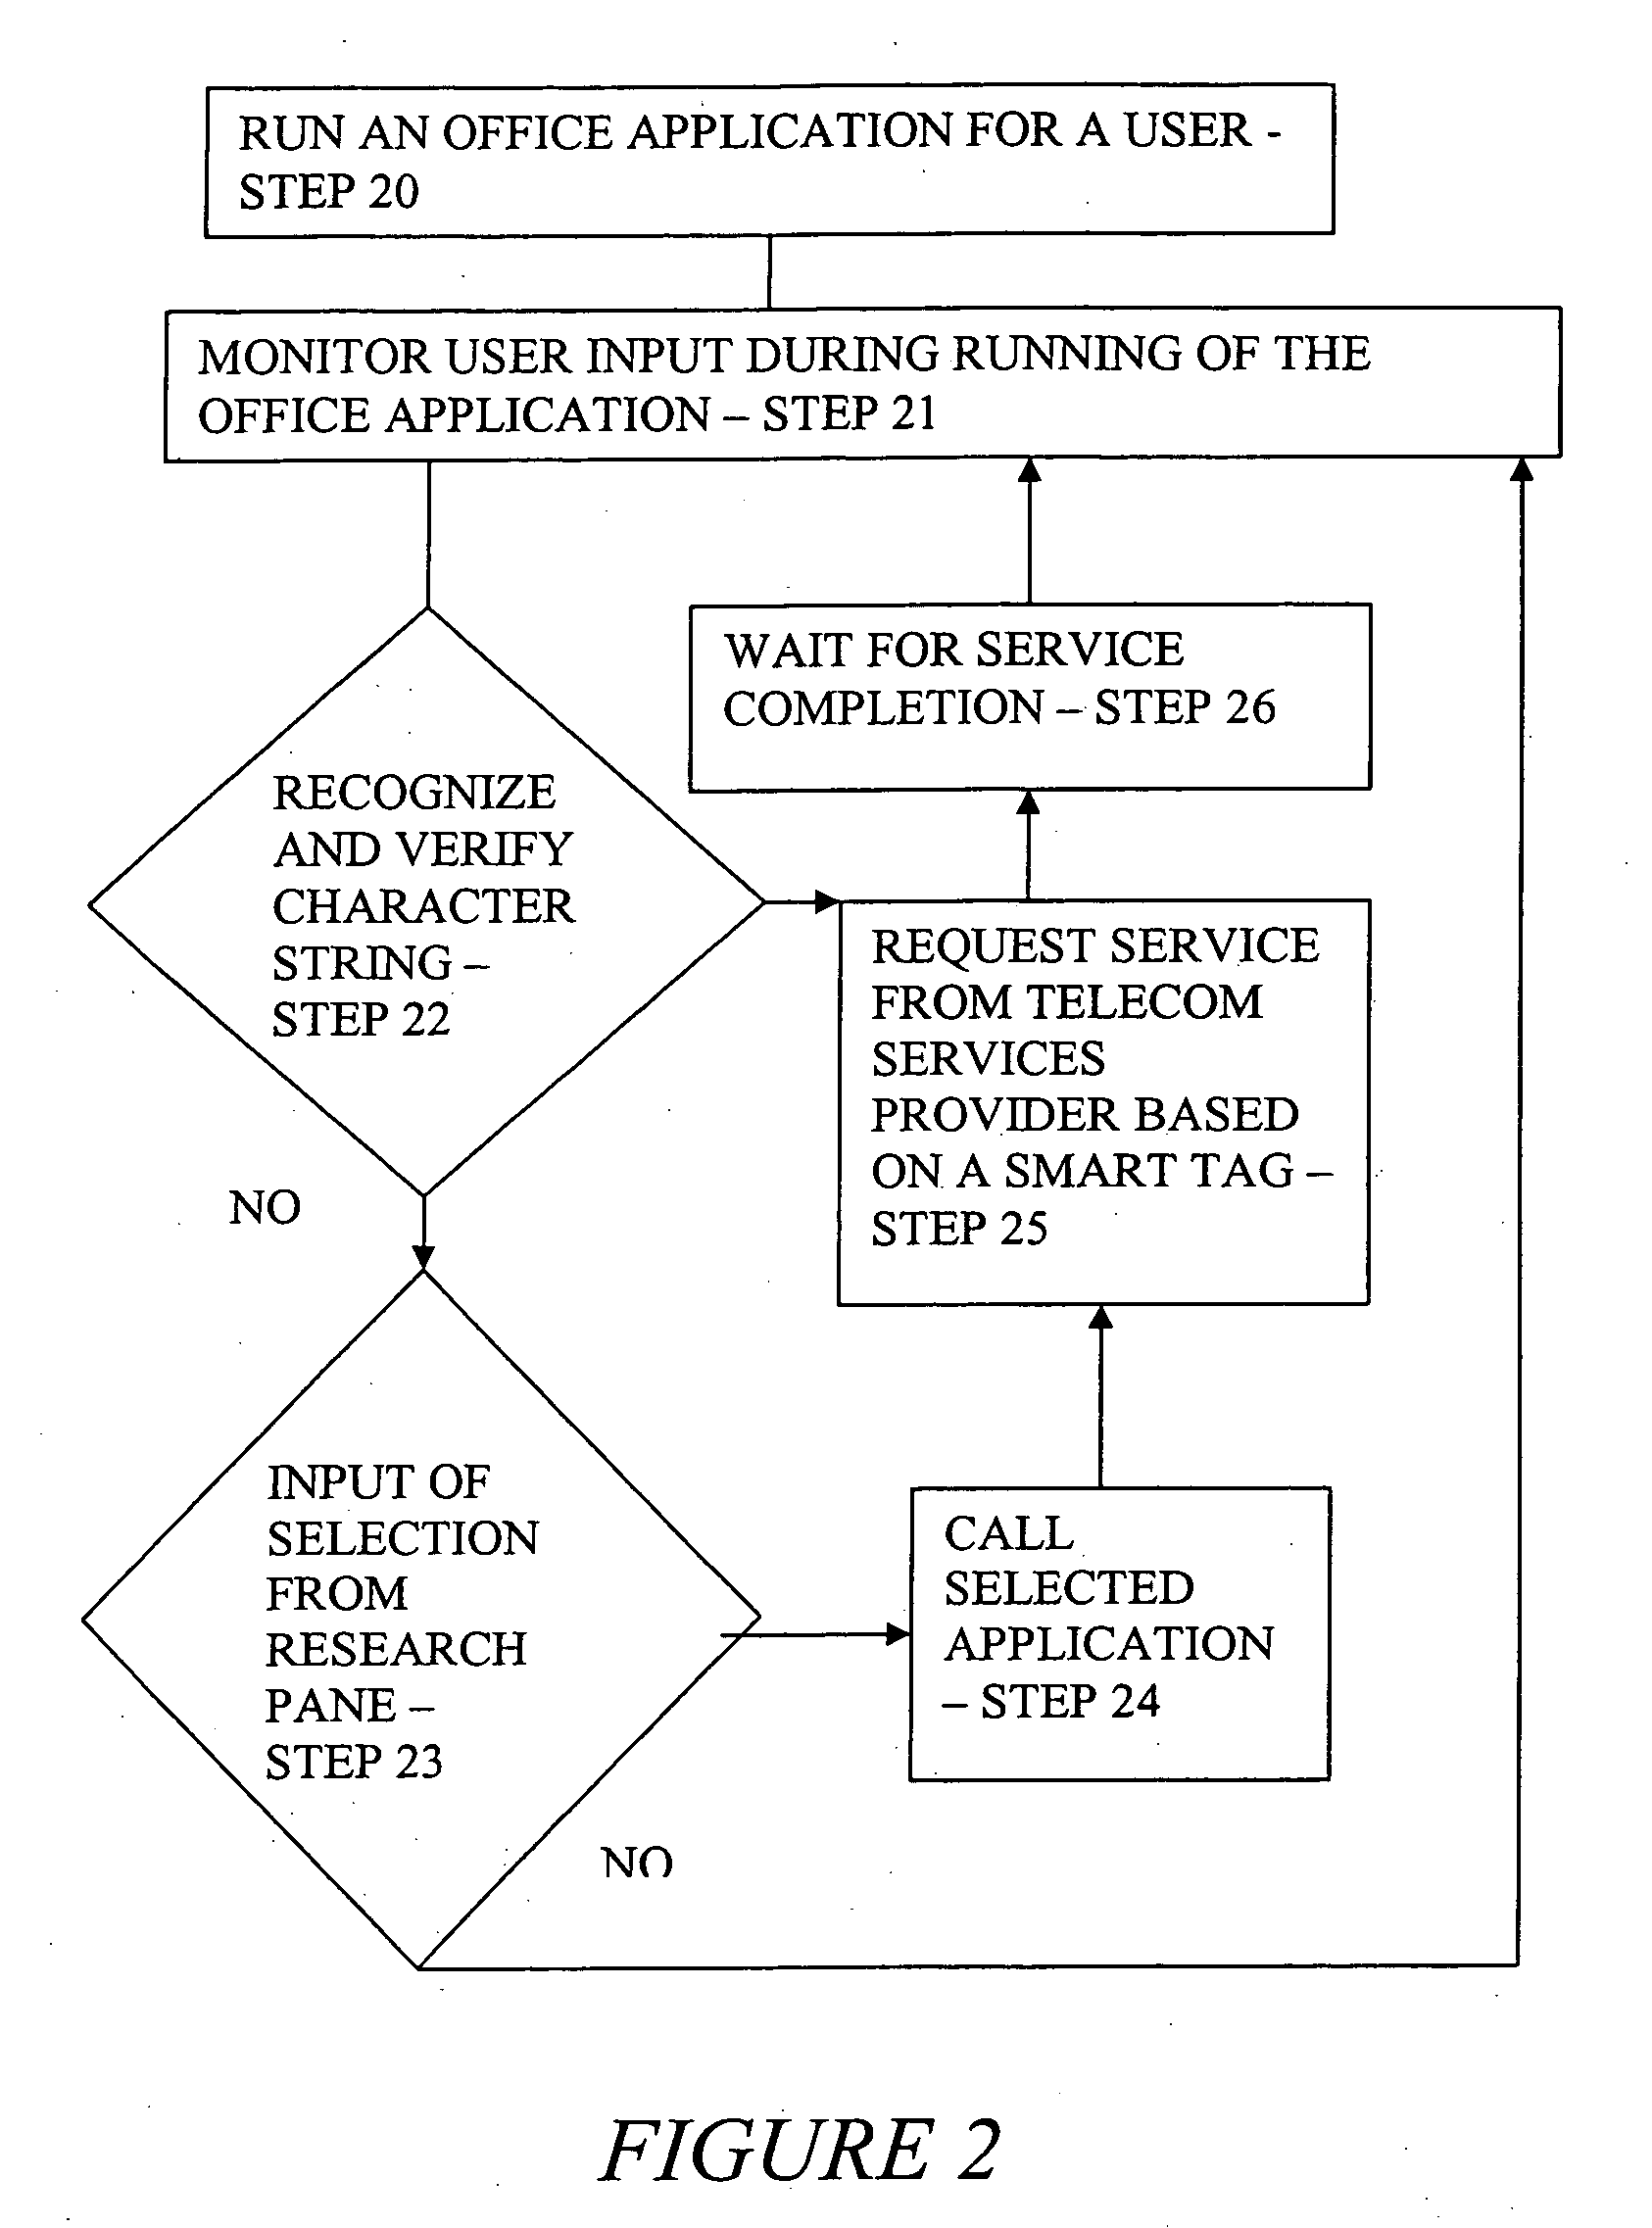 Integrated telecommunications/office automation apparatus, system, and computer program product